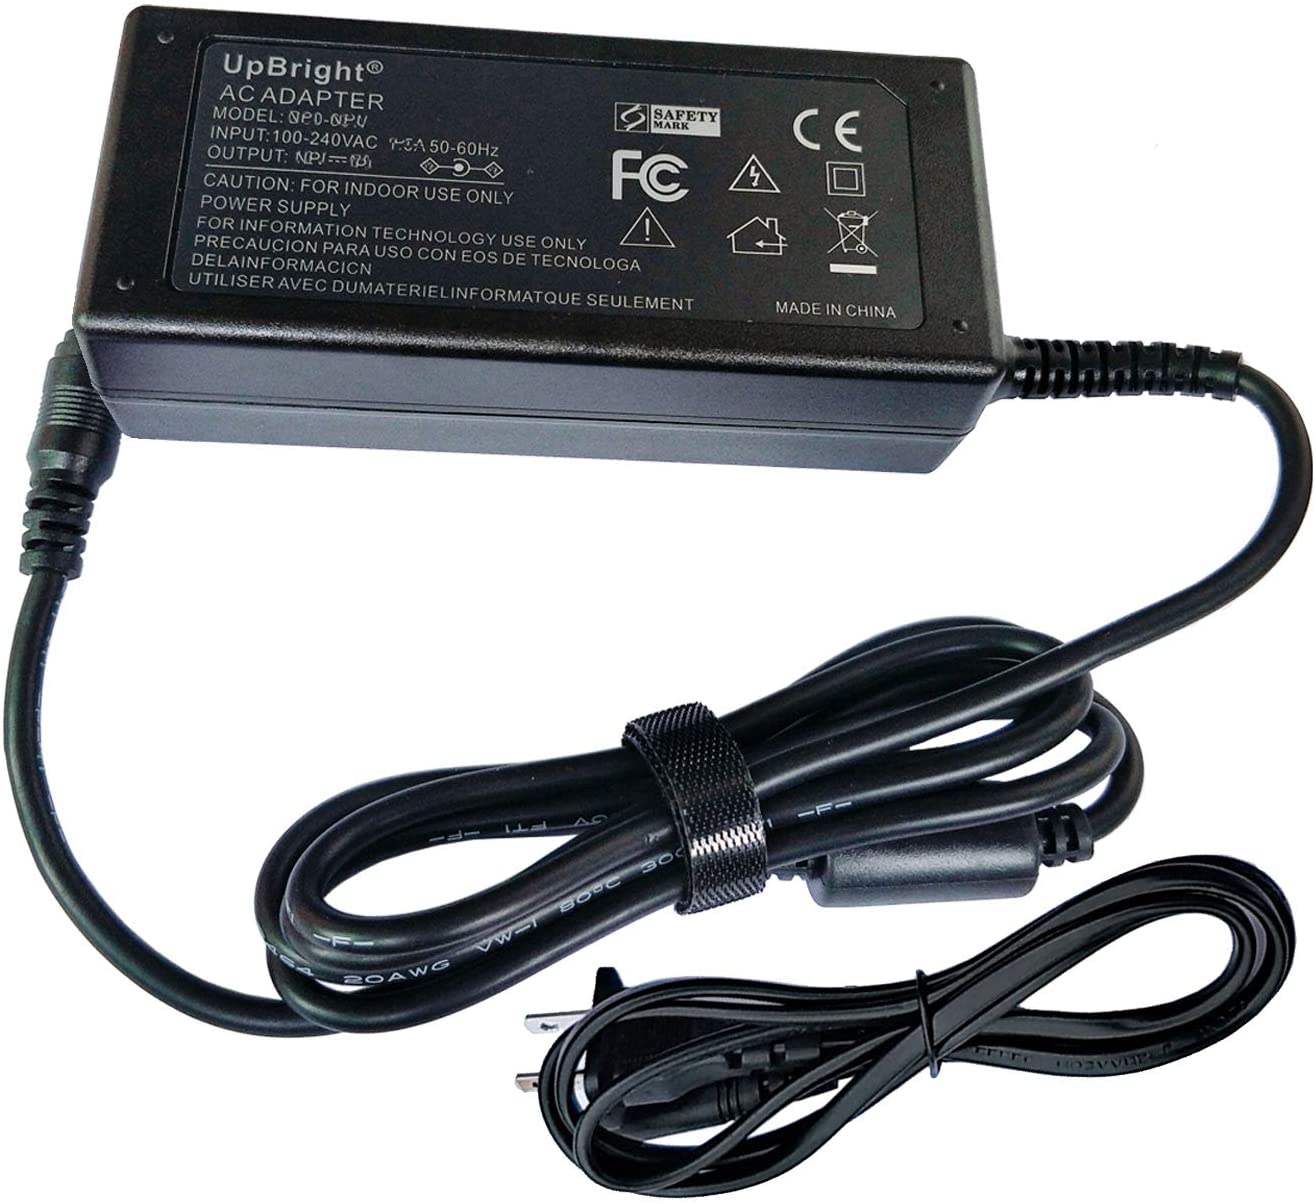 UPBRIGHT AC Adapter Compatible with HP Omen 25 Z7Y57AA Z7Y57A9 HSTND-9481-F 916600-001 Z7Y57AA#ABA Z7Y57A9#ABA X 25 X25 4NK94AA 4NK94AA#ABA 25f 4WH47AA 4WH47AA#ABA HSD-0021-Q L40999-001 Gaming Monitor - image 1 of 5